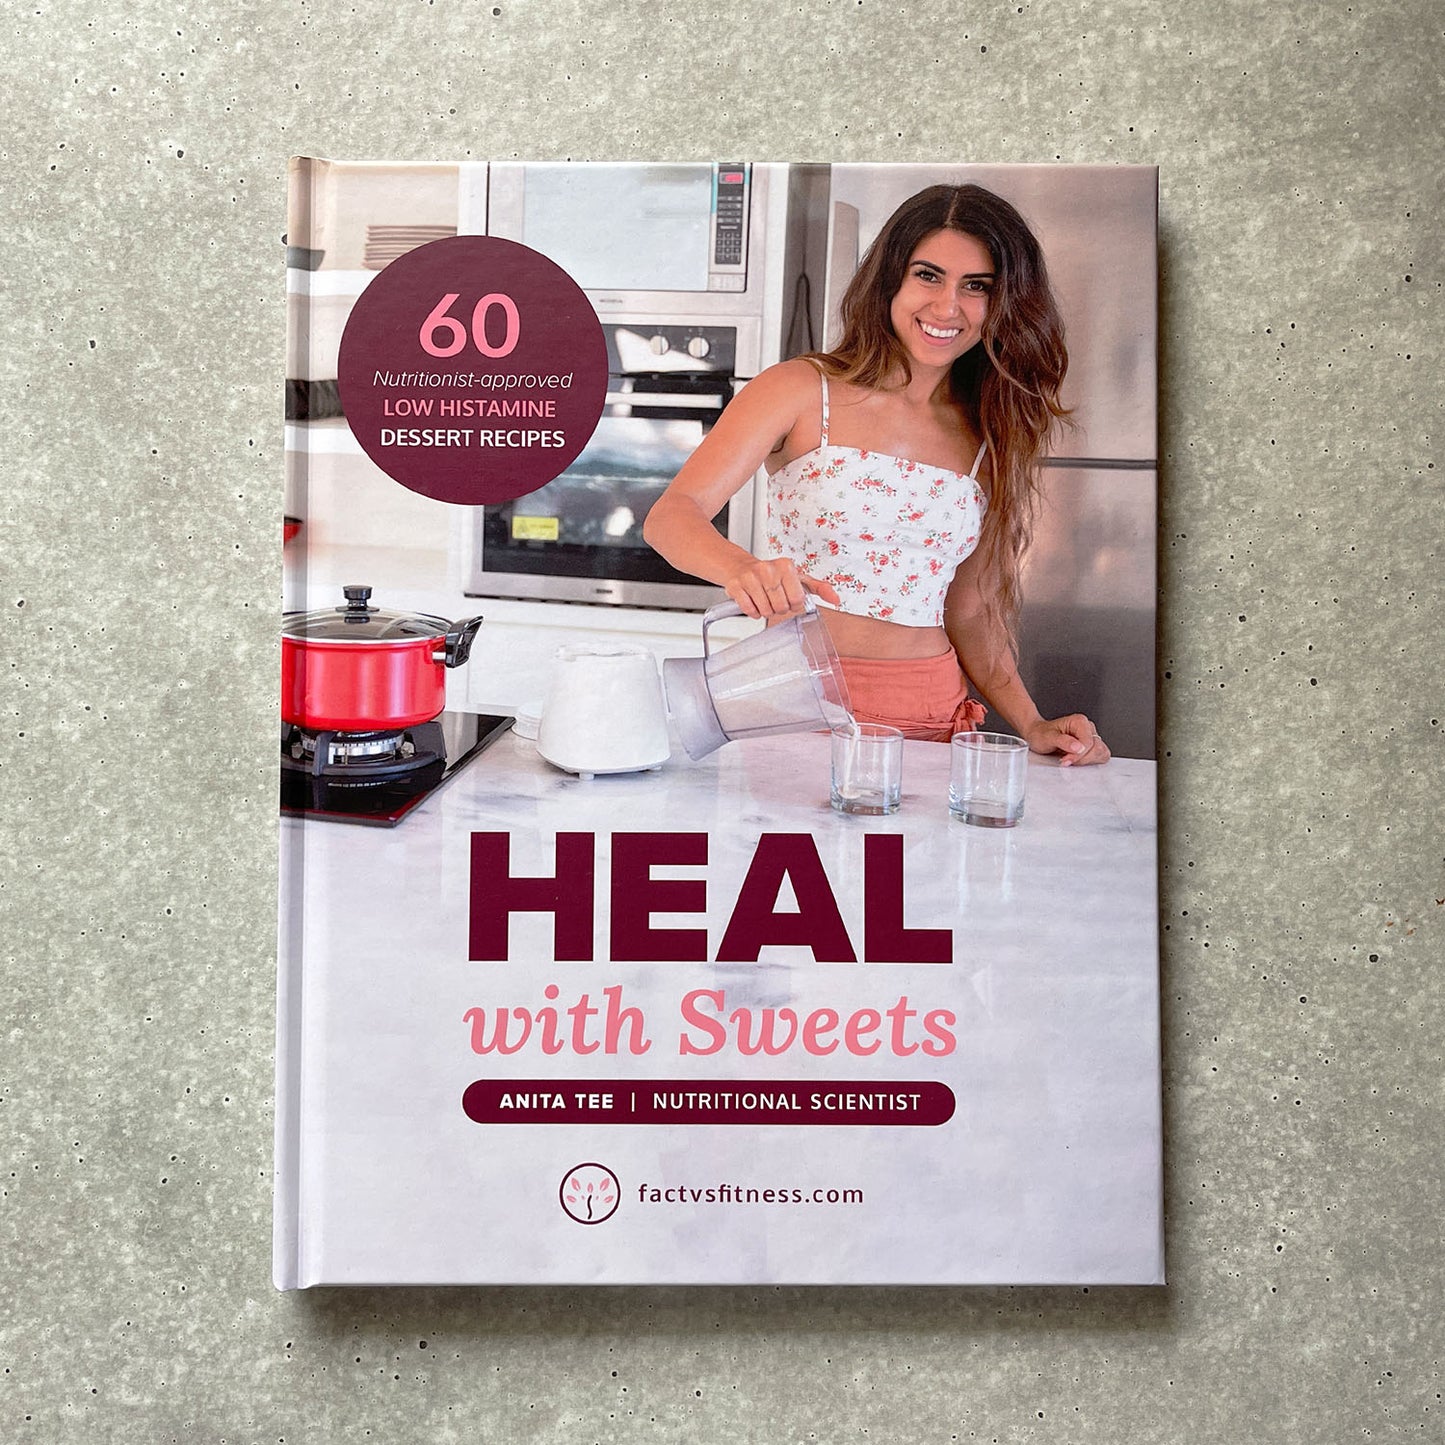 Heal with Sweets - 60 Low Histamine Dessert Recipes